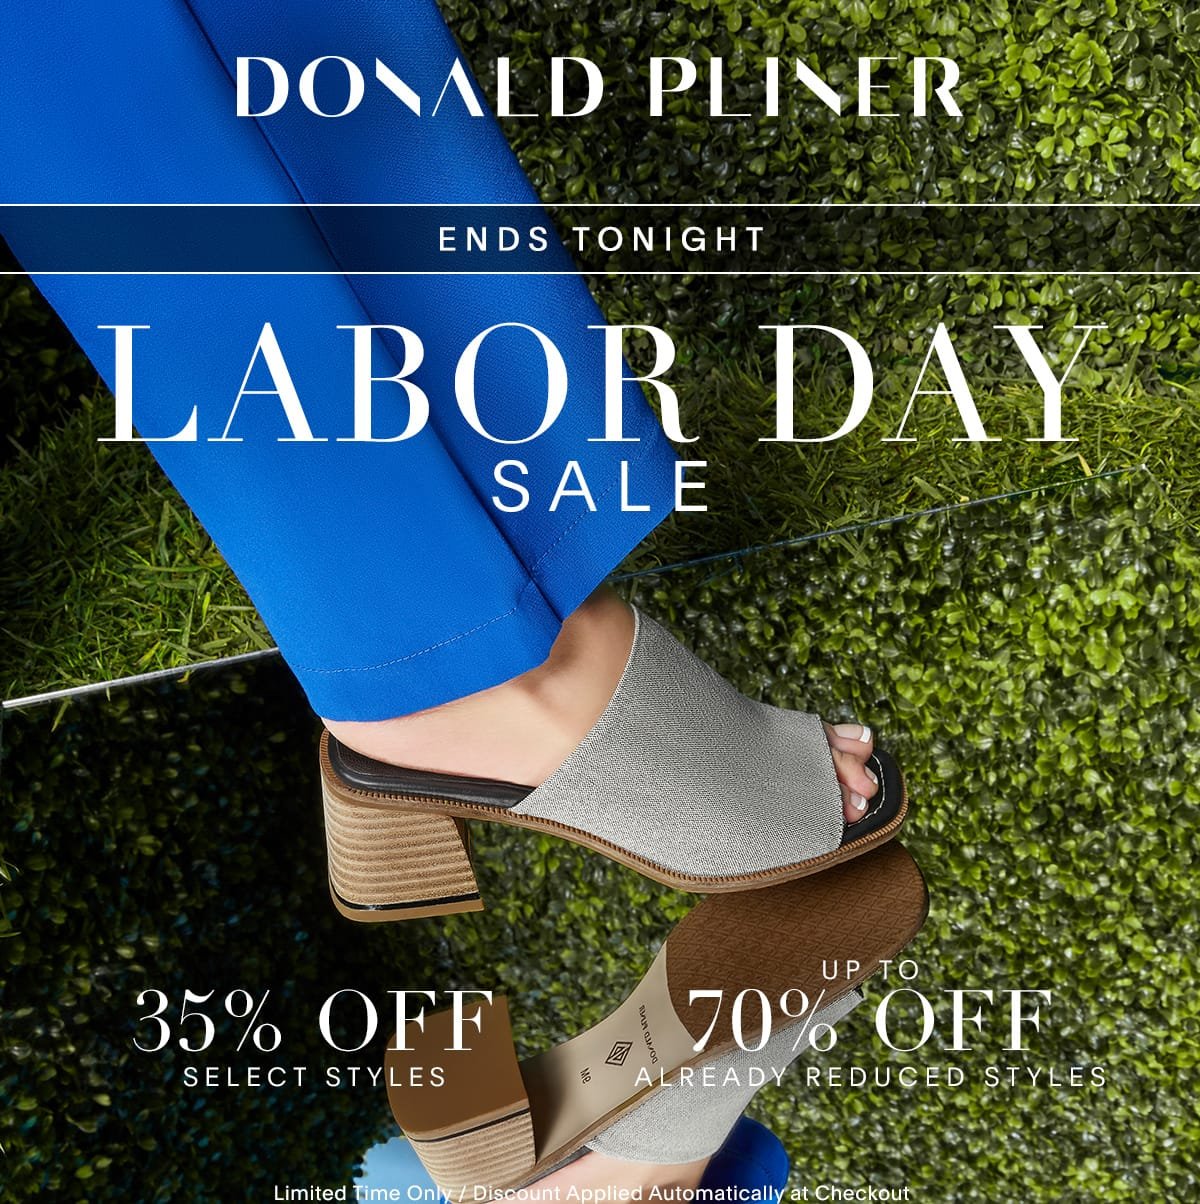 Donald Pliner. Ends Tonight. Labor Day Sale. 35% OFF Select Styles. Up to 70% Off Already Reduced Styles. Limited Time Only / Discount Applied Automatically at Checkout